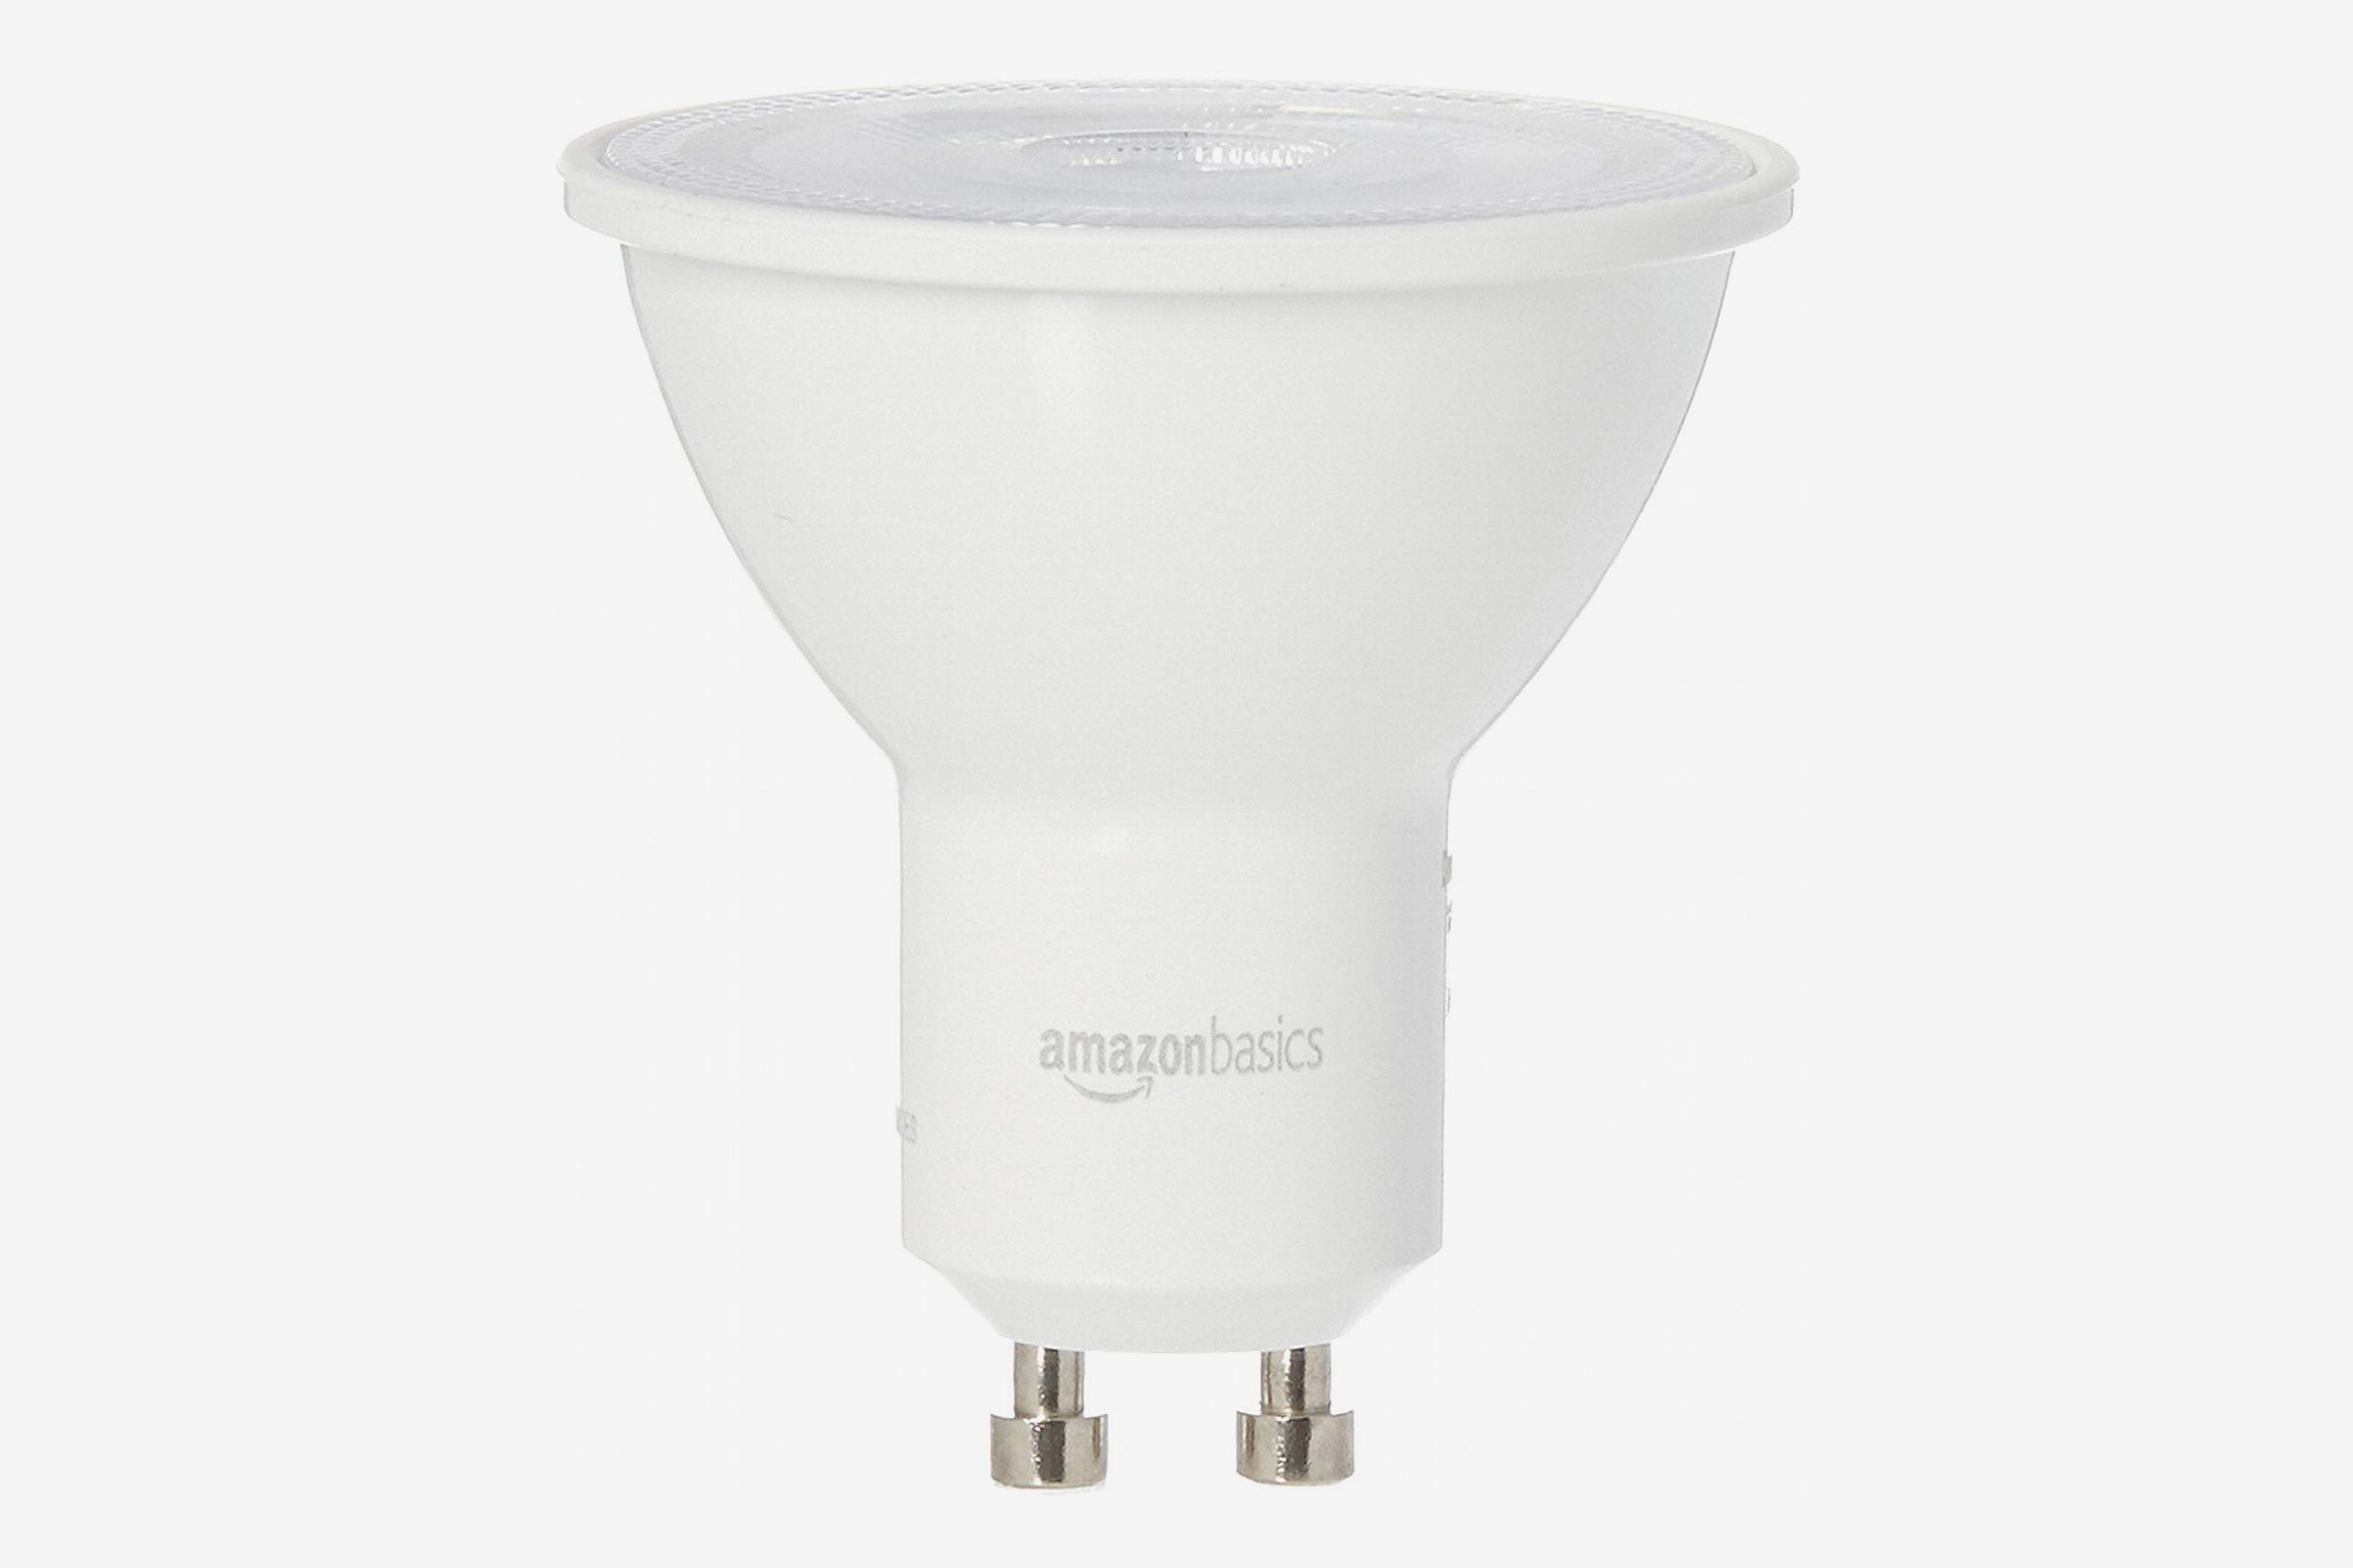 LAP LED GU10 DIMMABLE X2 